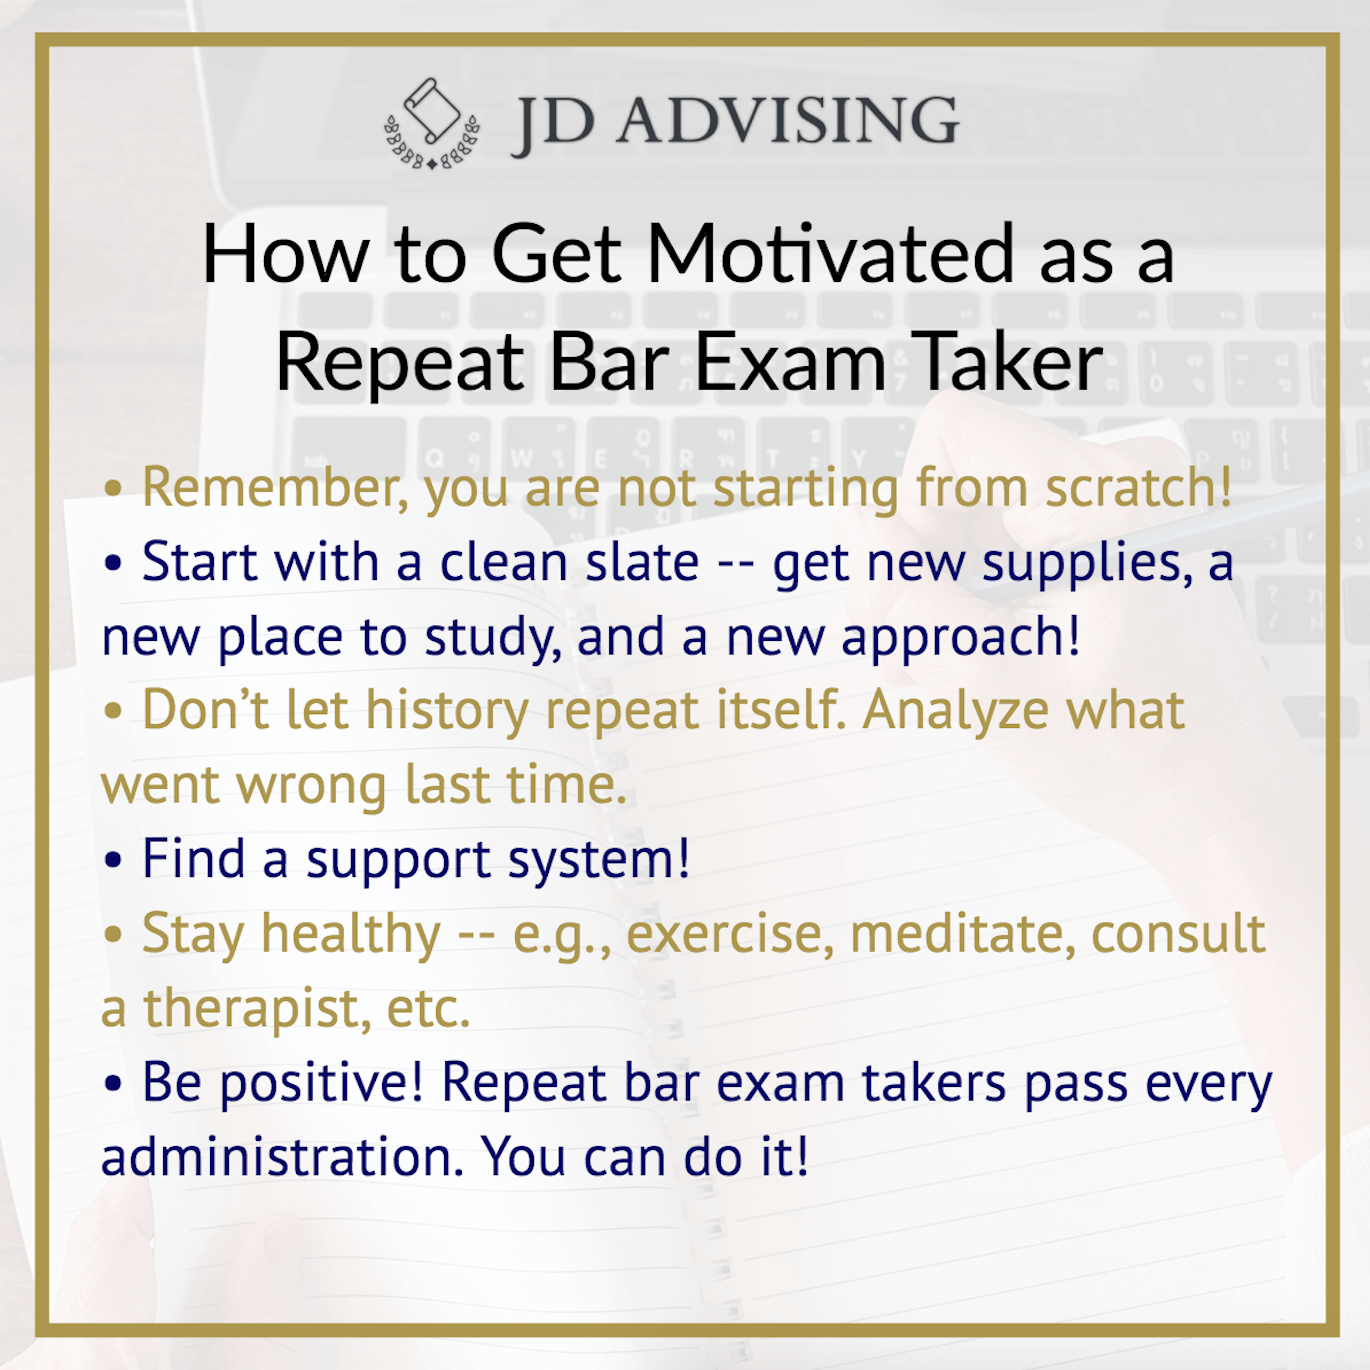 get motivated as a repeat bar exam taker